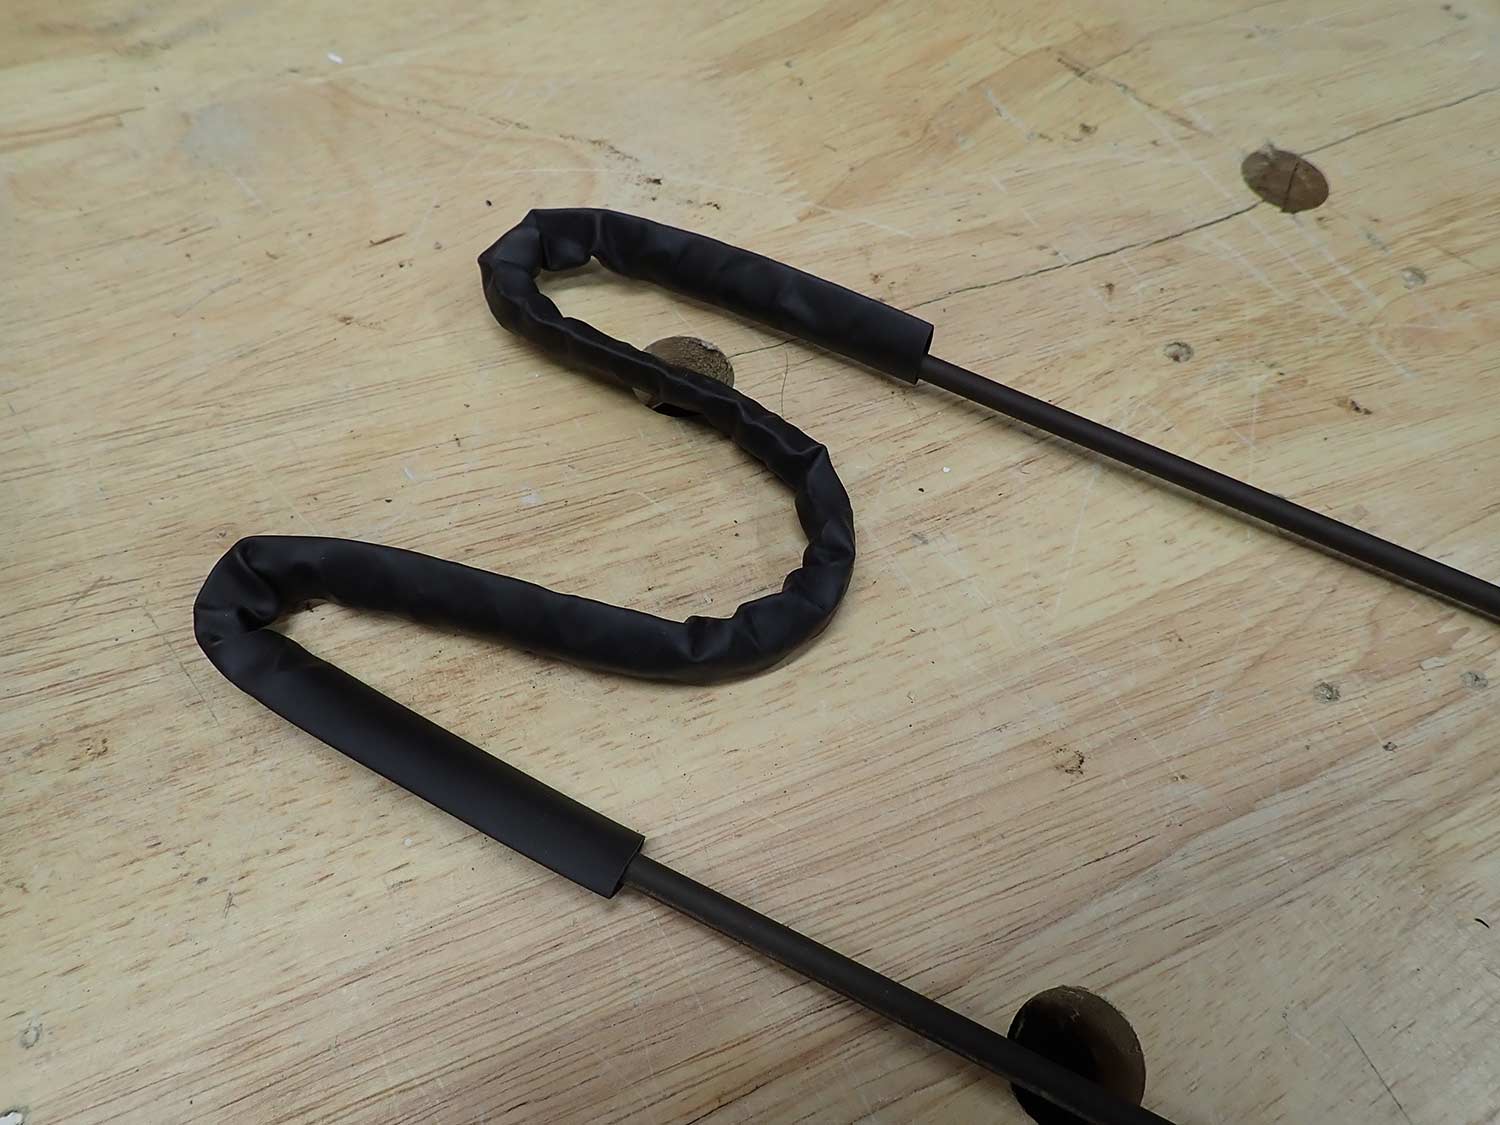 A simple gun rest made from bent wire.